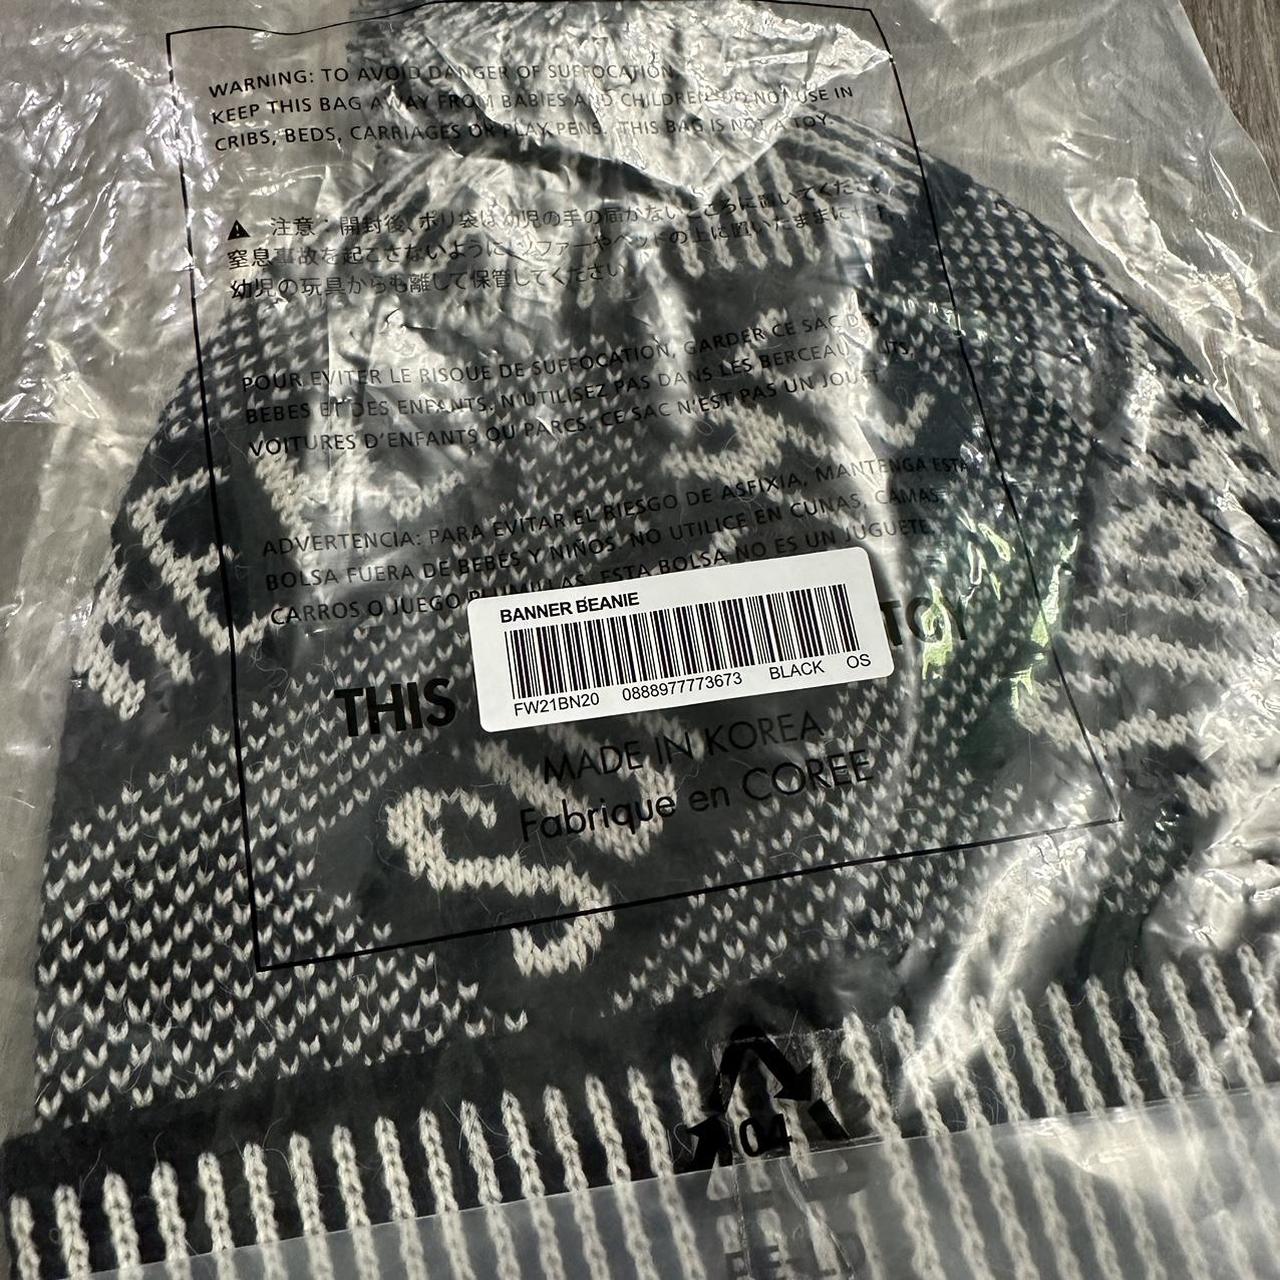 You are buying a brand new Supreme Banner Beanie... - Depop